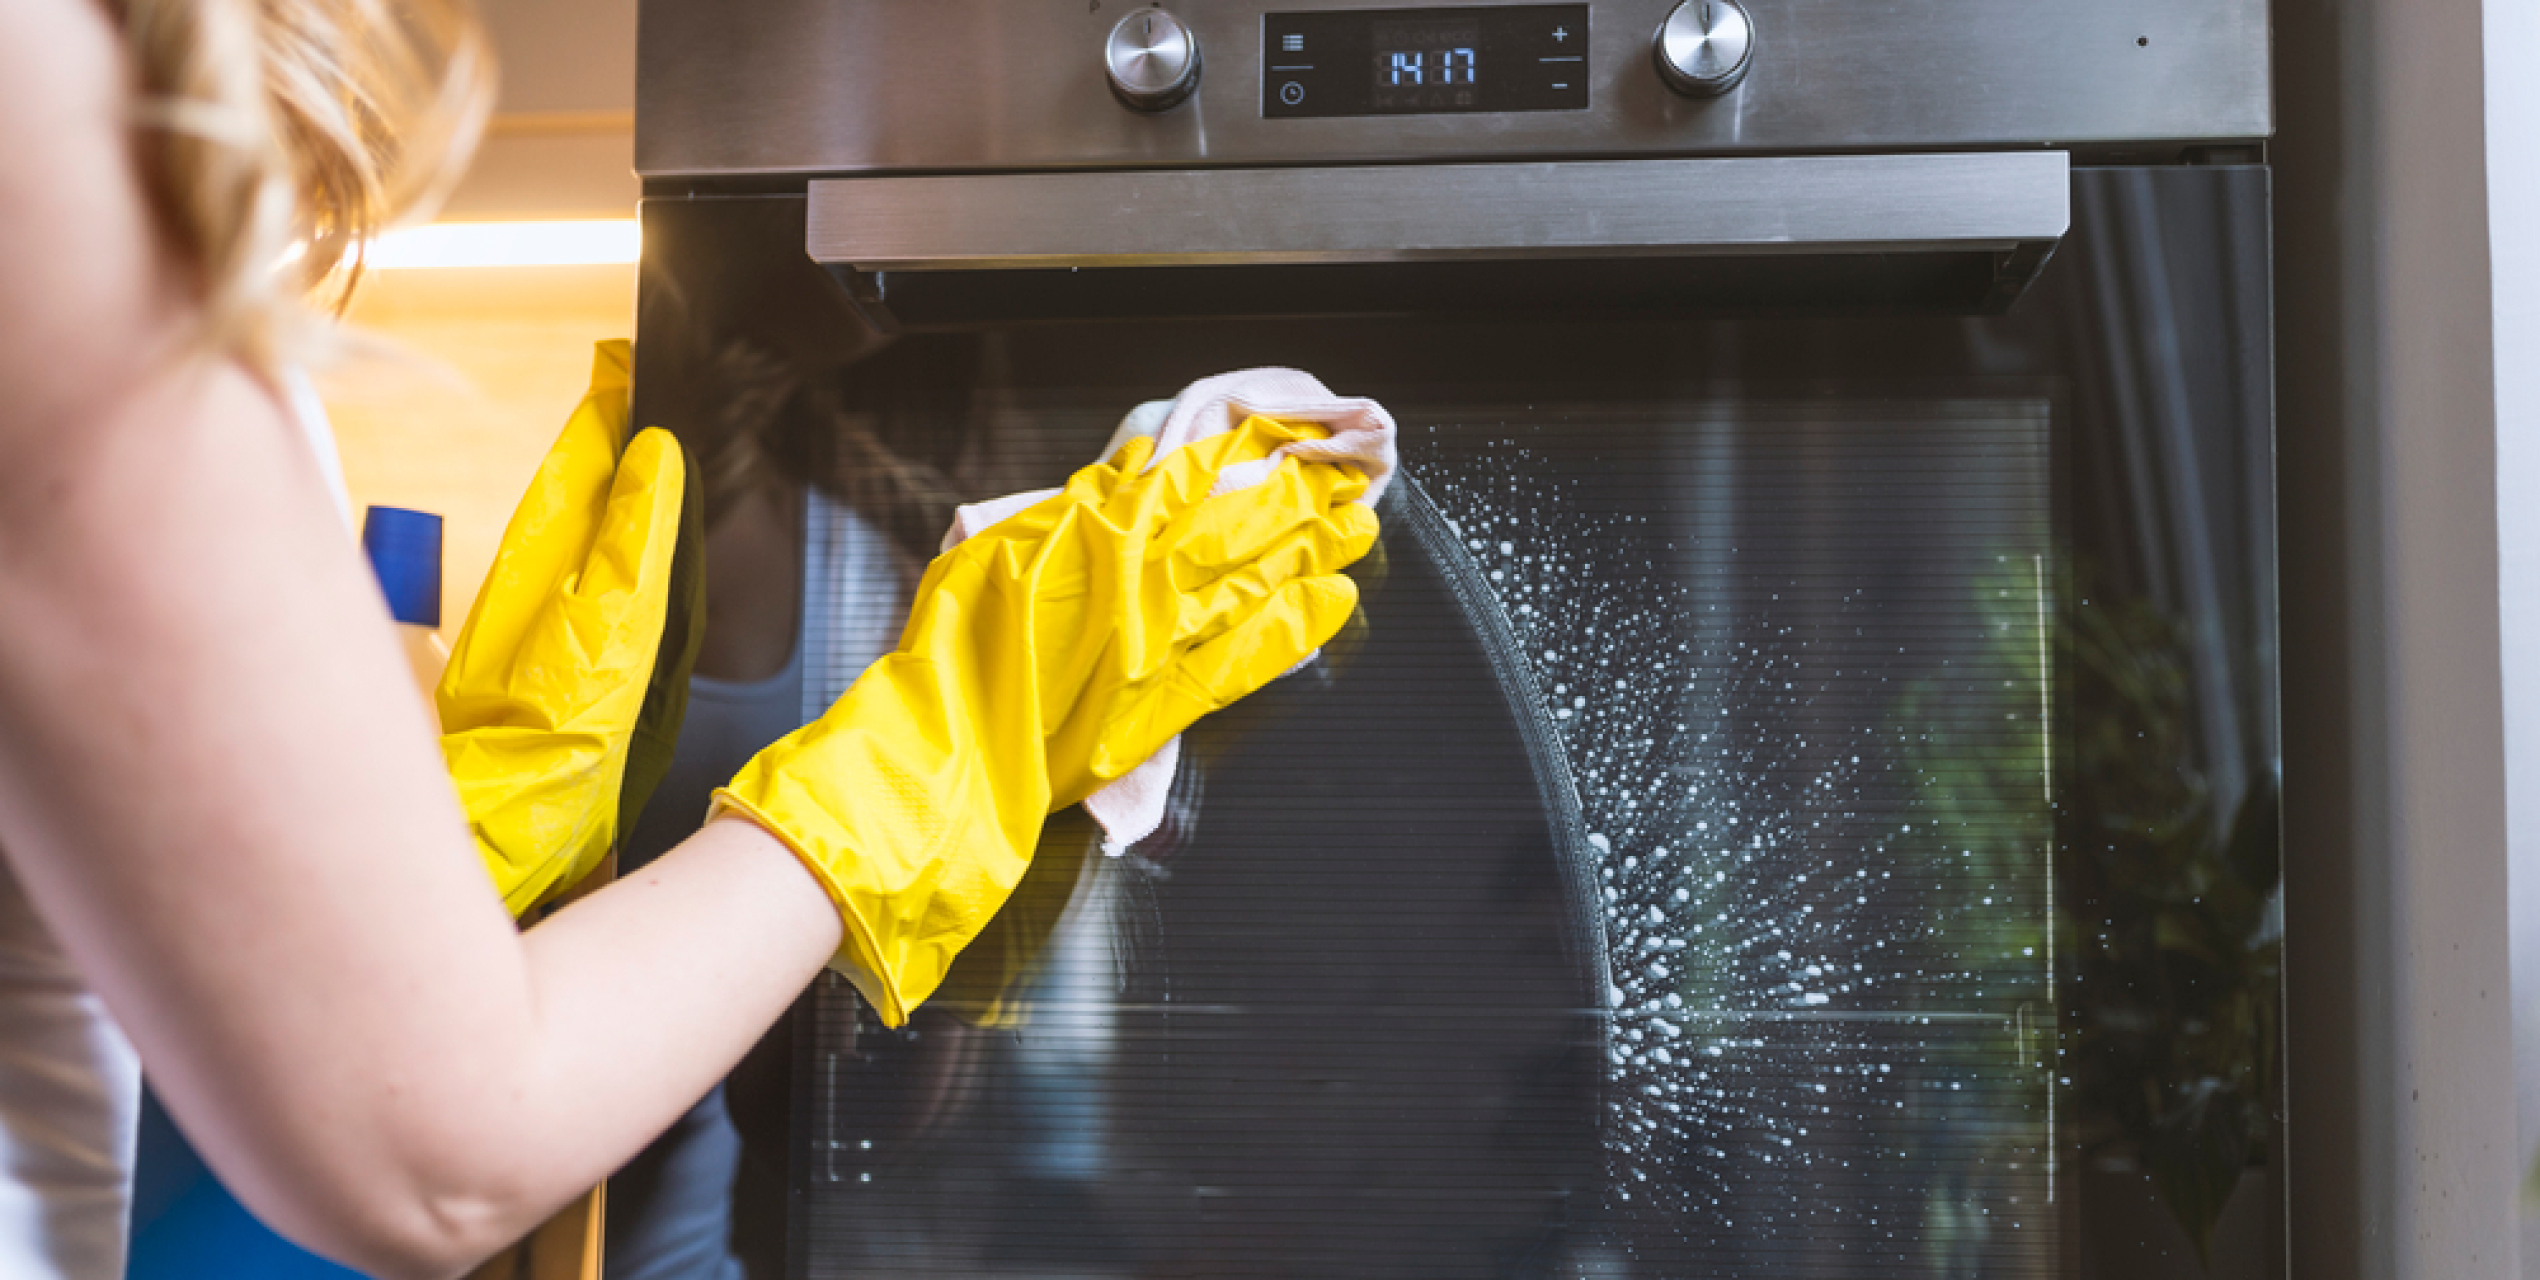 Clean the oven and its surface